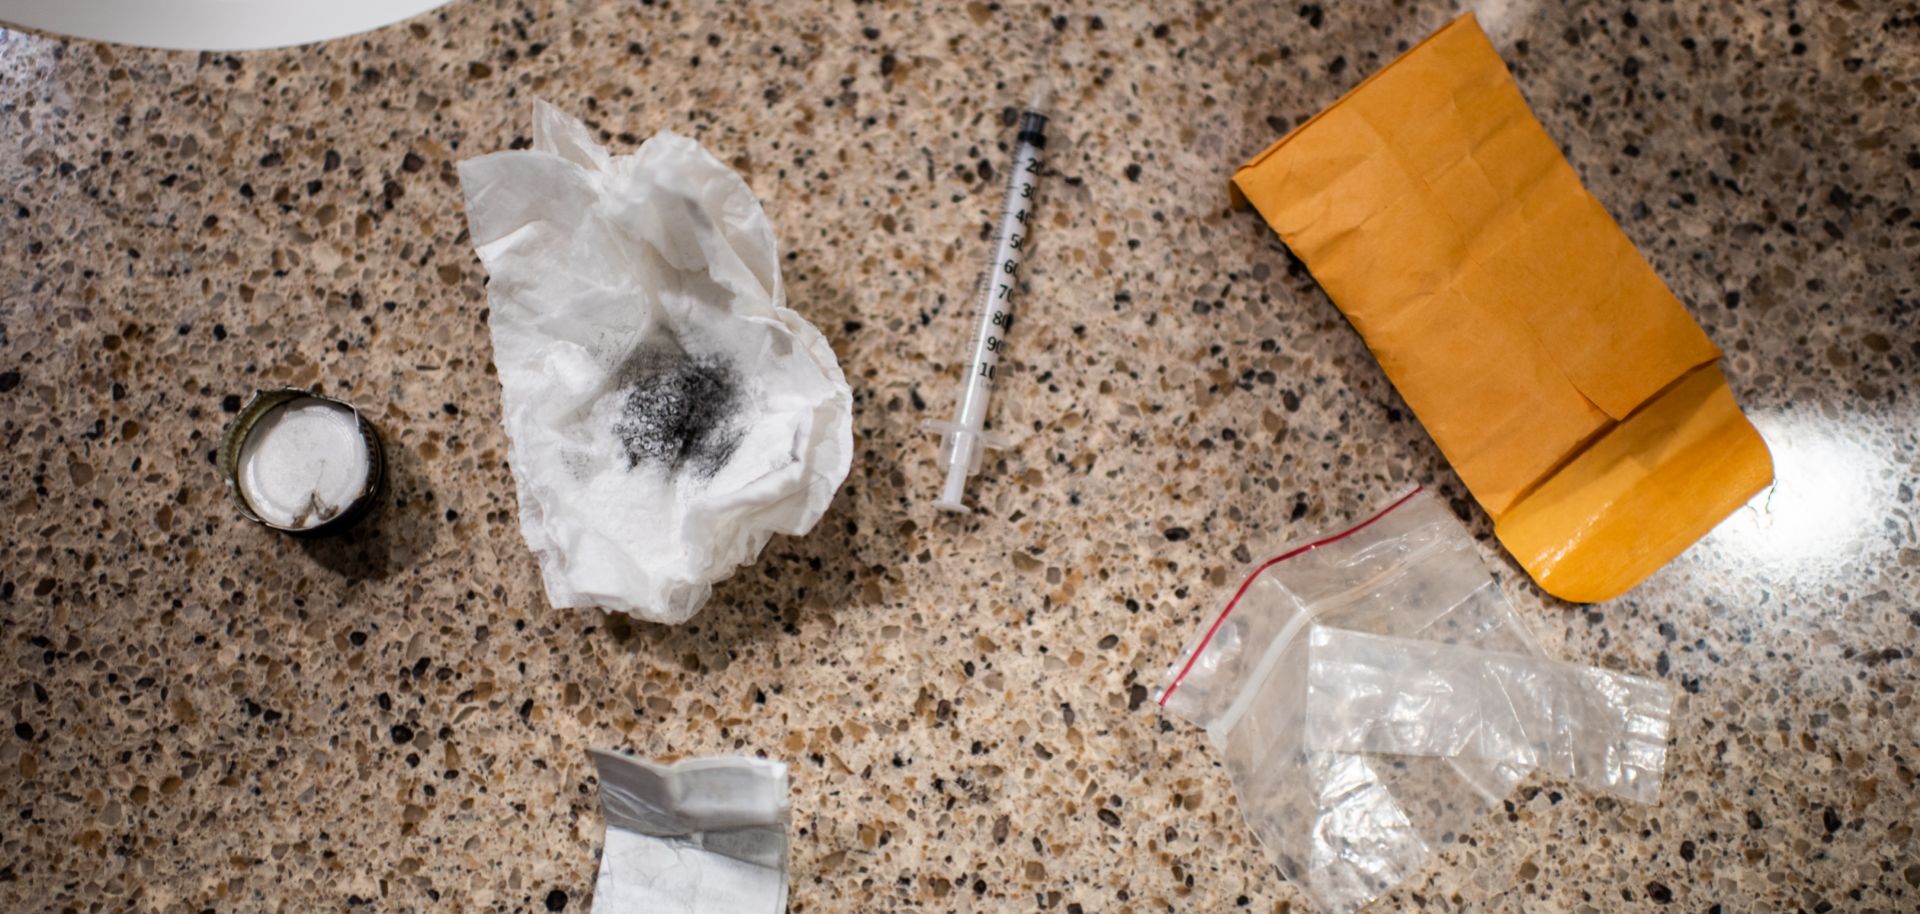 A kit is seen next to the sink of a Walmart bathroom in Manchester, New Hampshire, on Feb. 10, 2019, after a woman was caught trying to shoot either heroin or fentanyl.